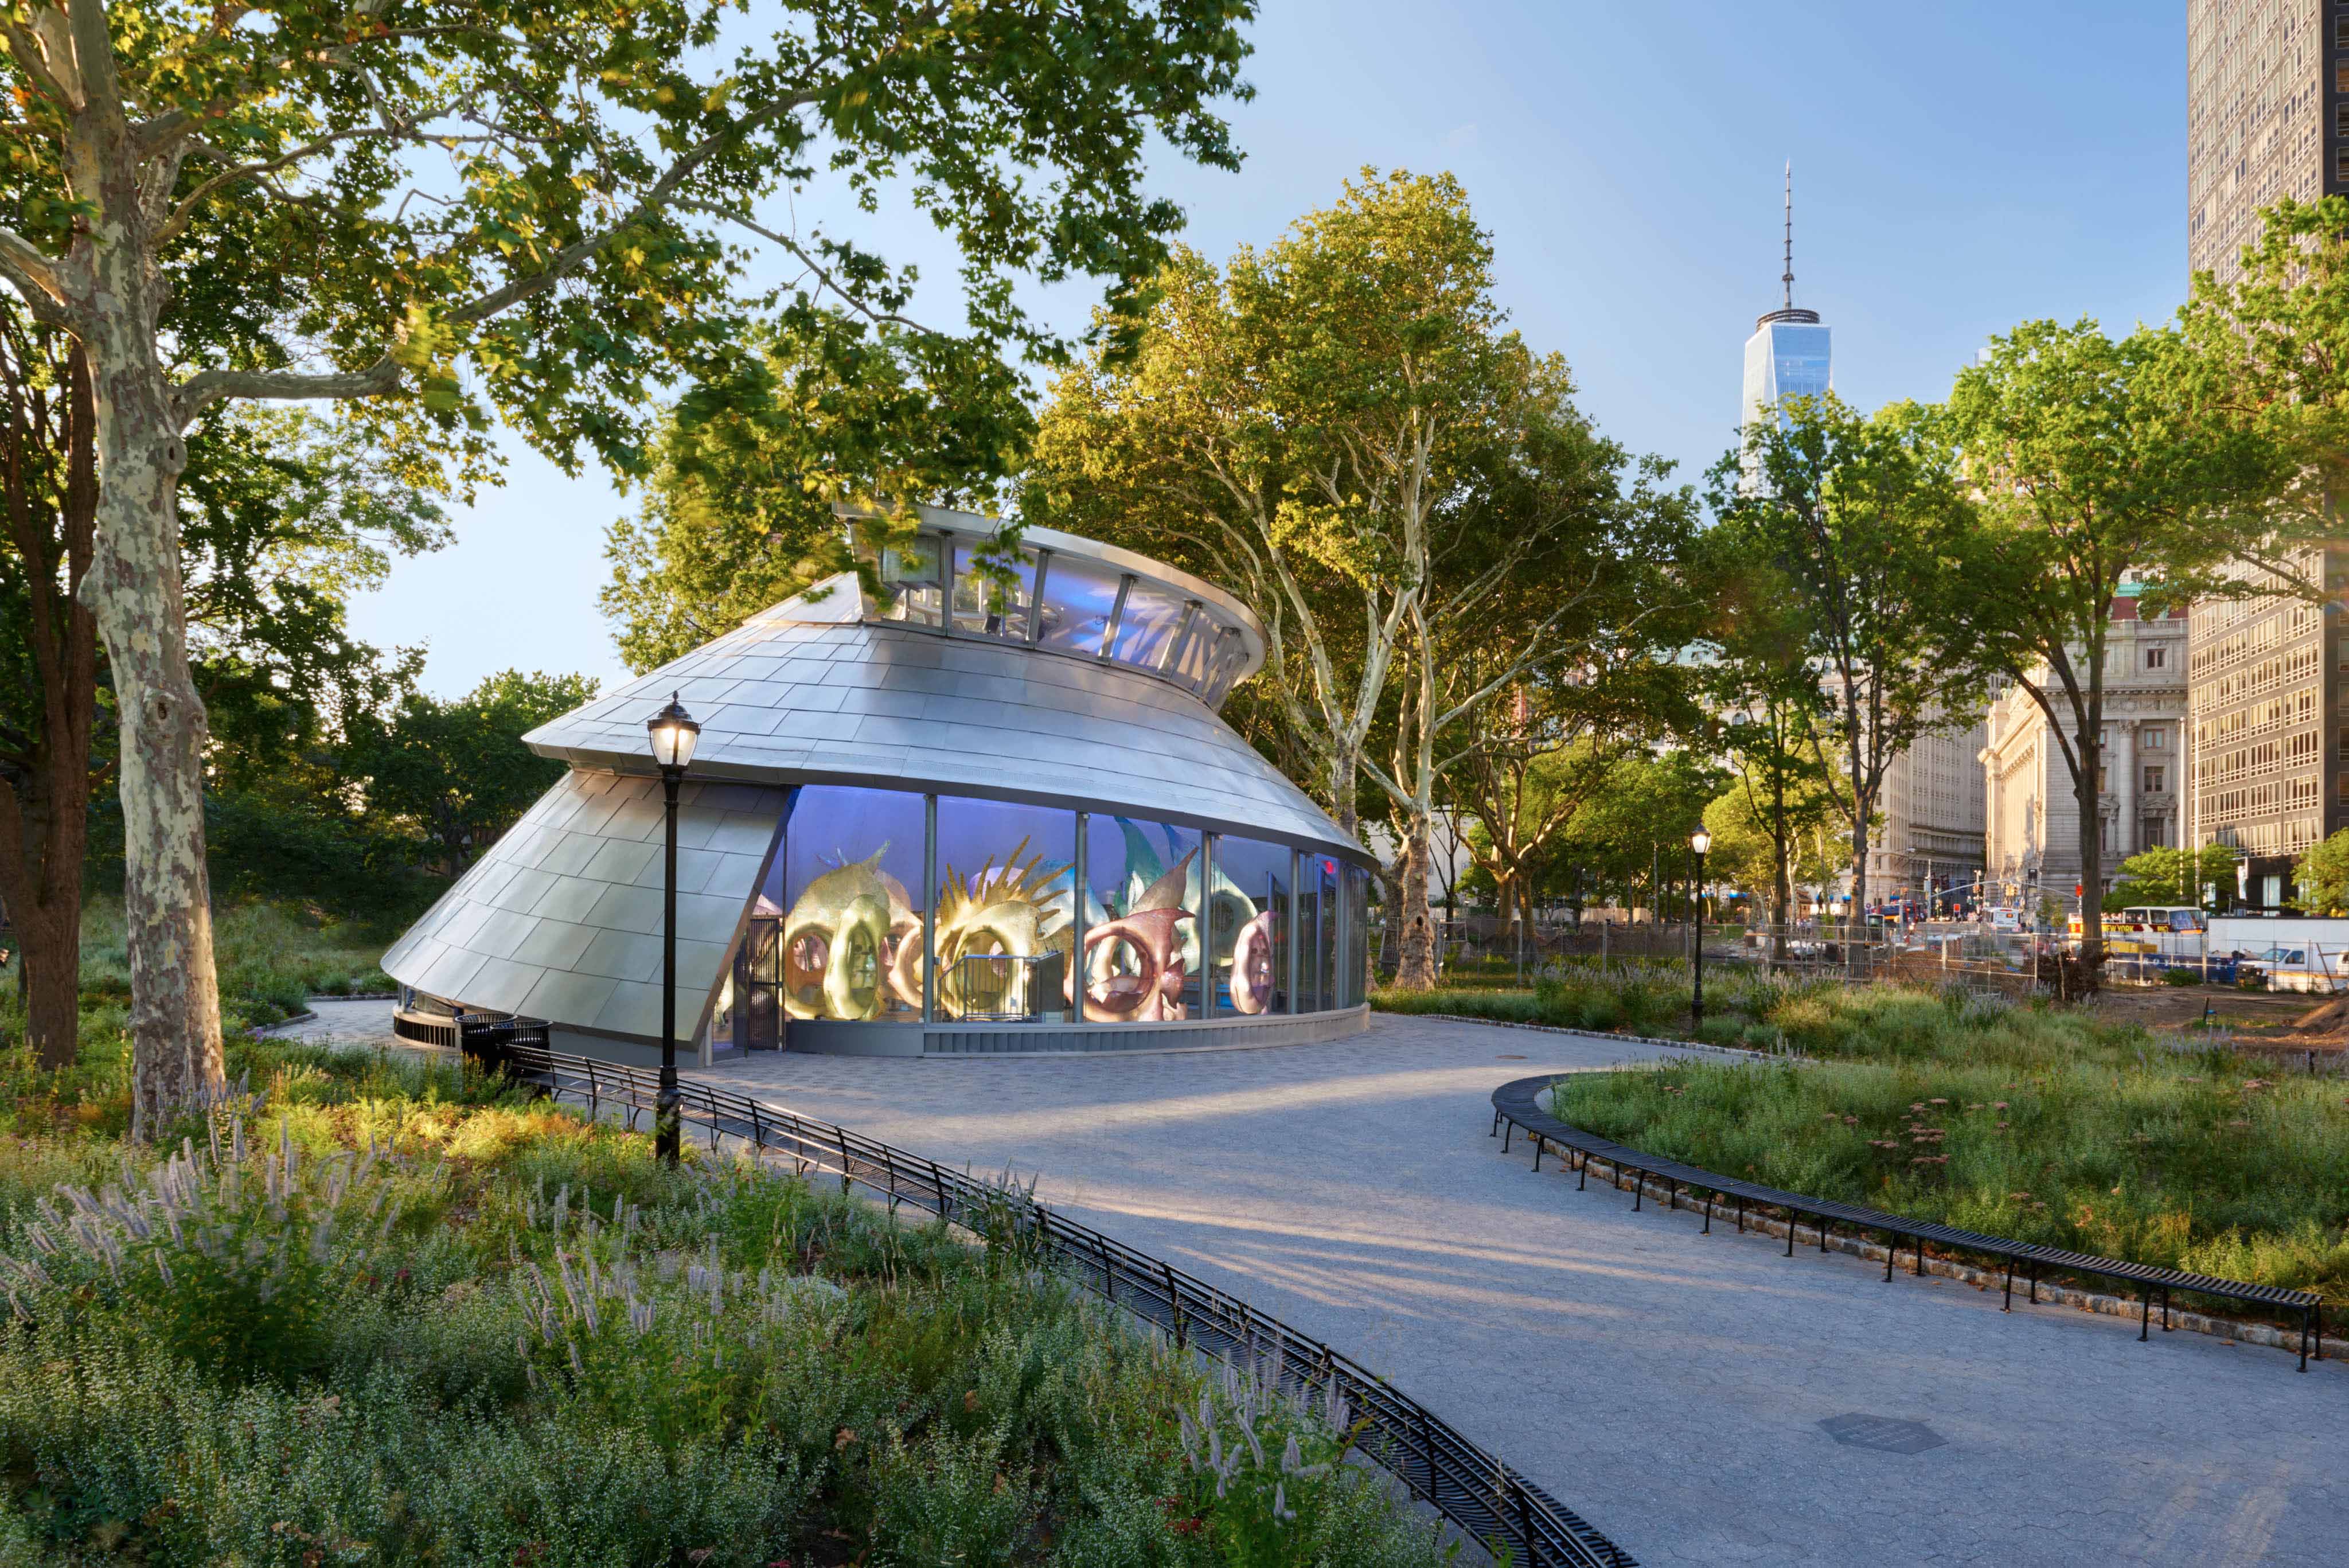 Archtober Building of the Day: SeaGlass Carousel